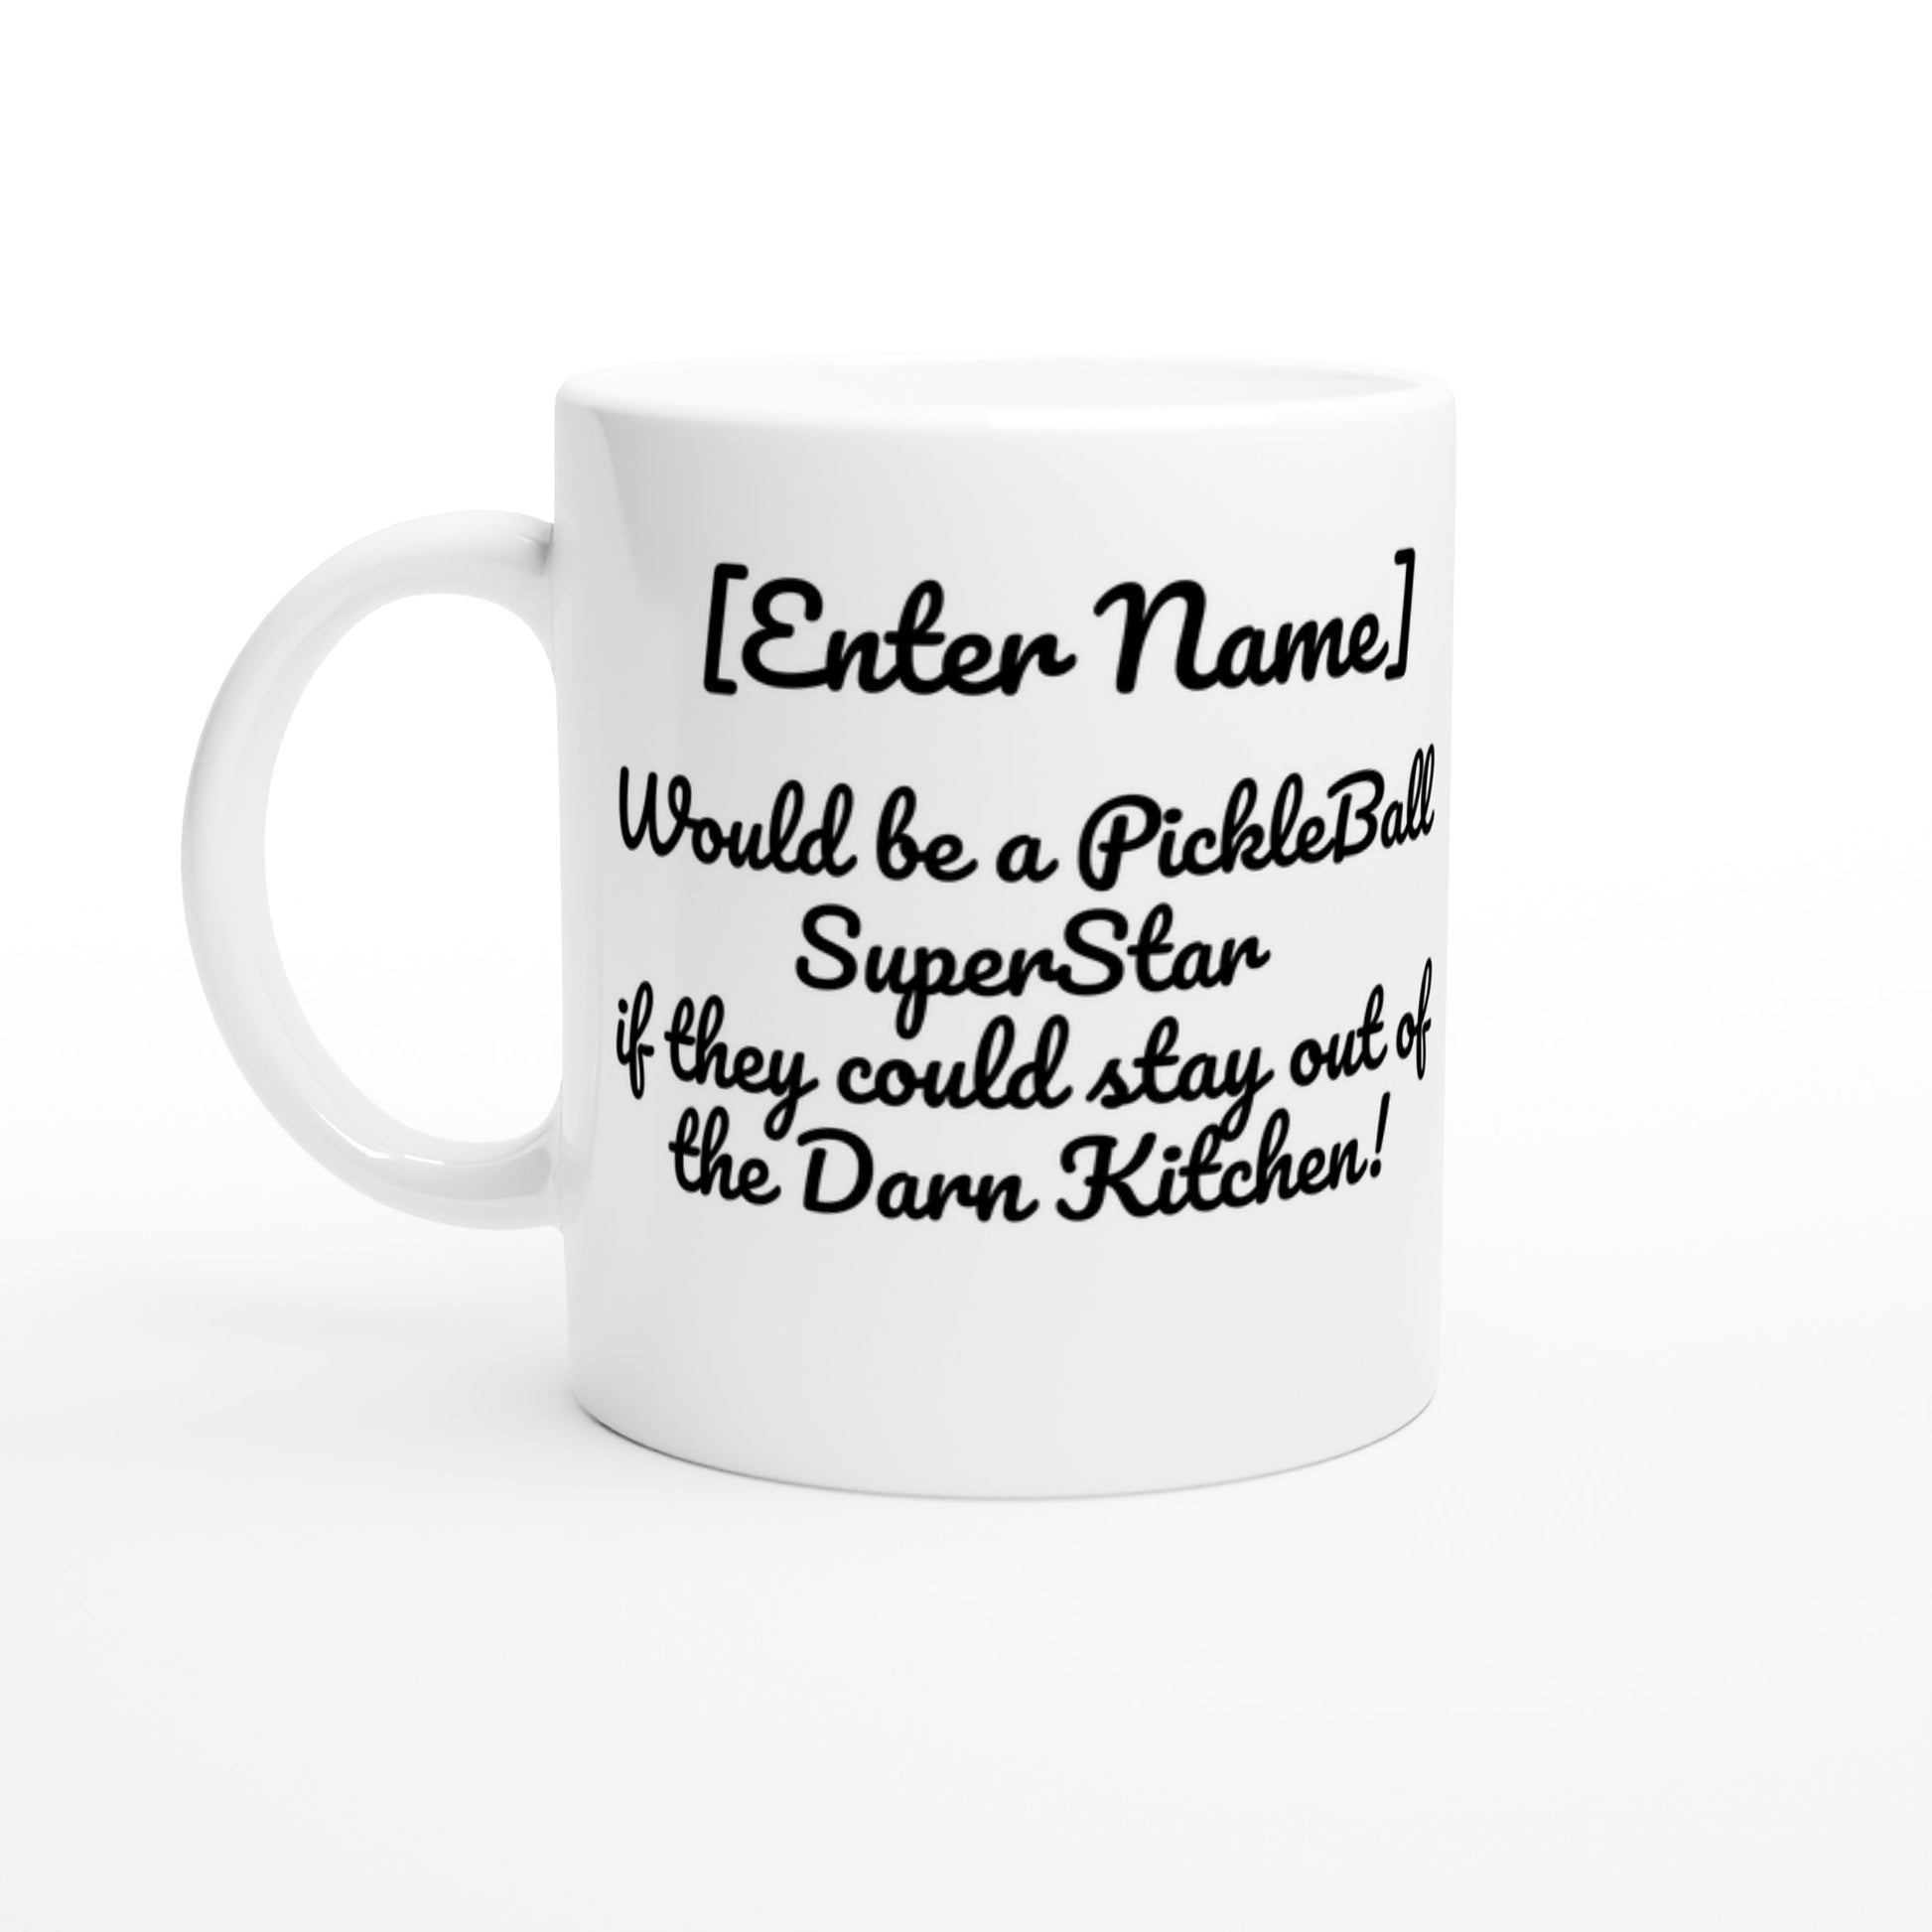 Personalized White ceramic 11oz mug with white handle Personalized with motto  Your Name Would be a PickleBall Superstar if they could stay out of the Darn Kitchen front side Let's Play PickleBall logo on back dishwasher and microwave safe ceramic coffee mug from WhatYa Say Apparel front view.